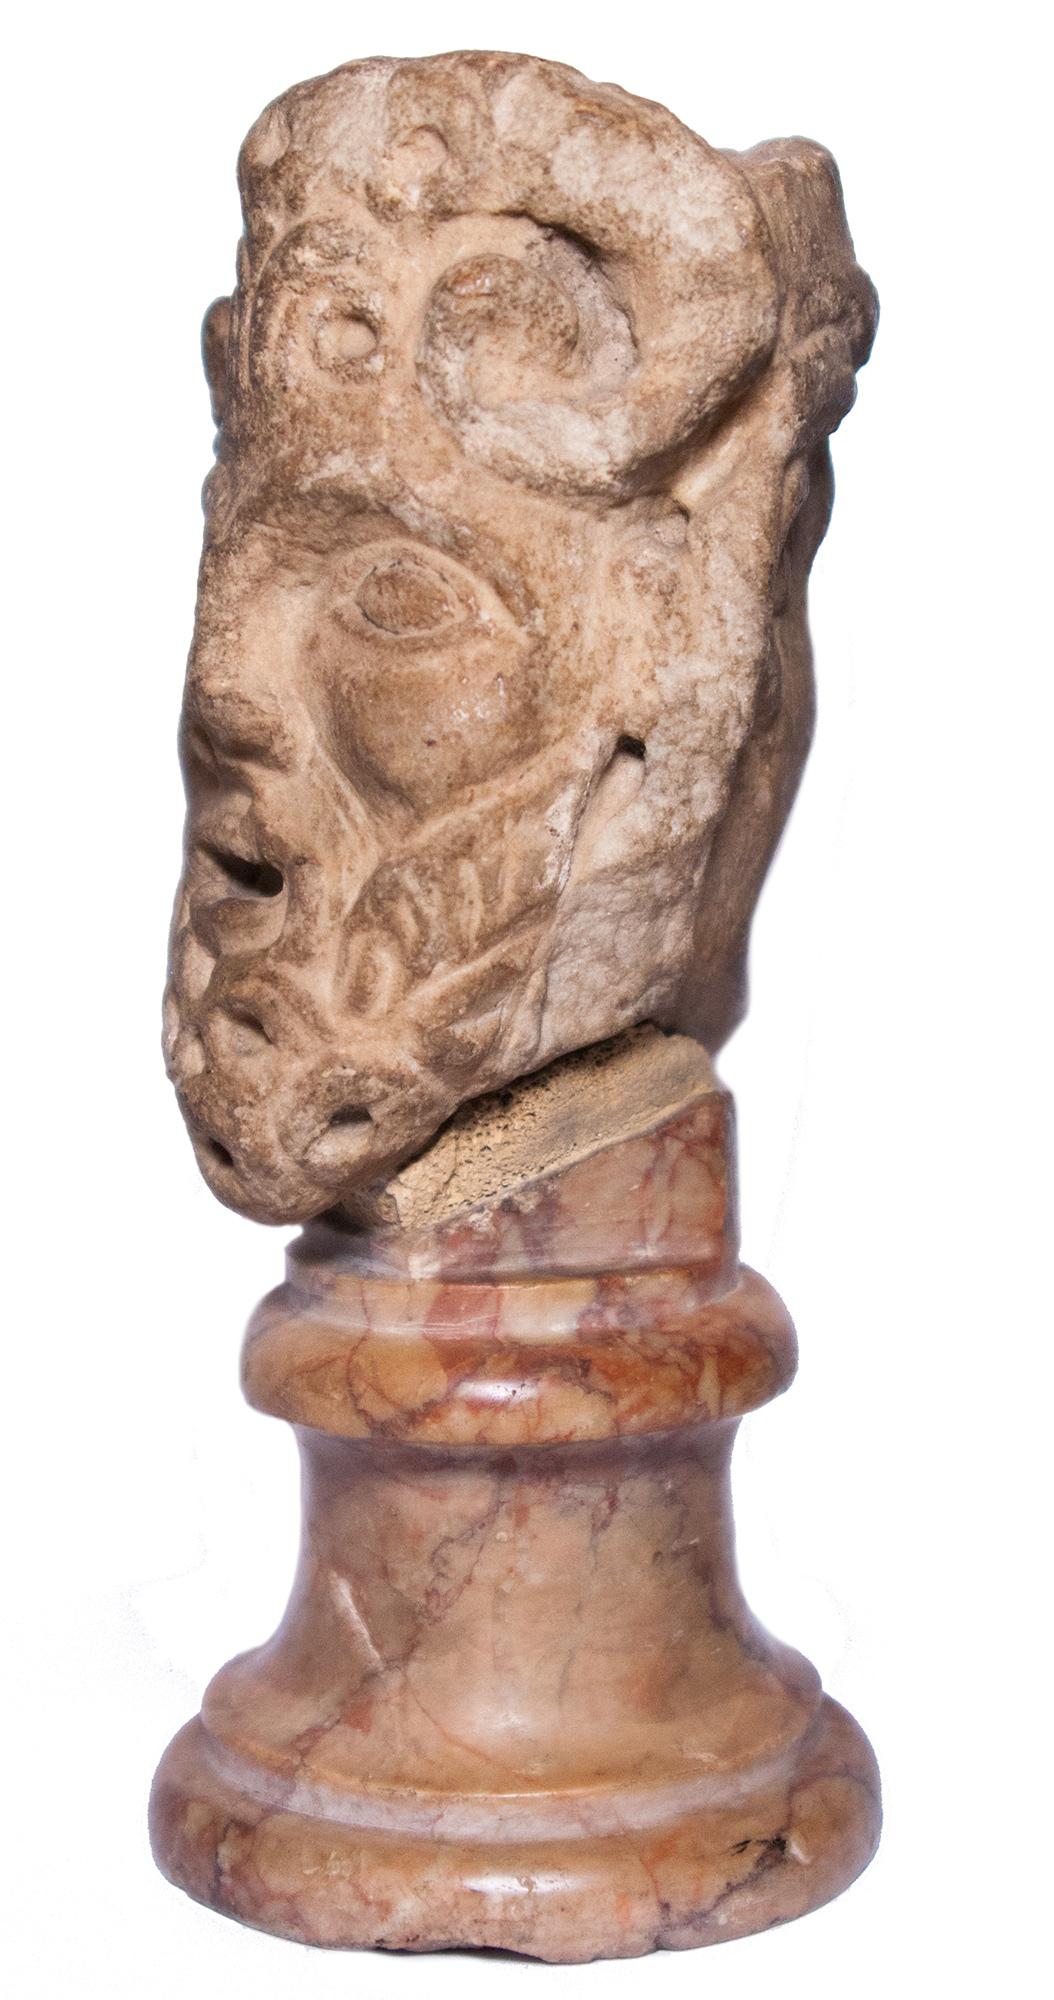 Janiform marble head, Italy, 12th-13th century - Sculpture by Unknown